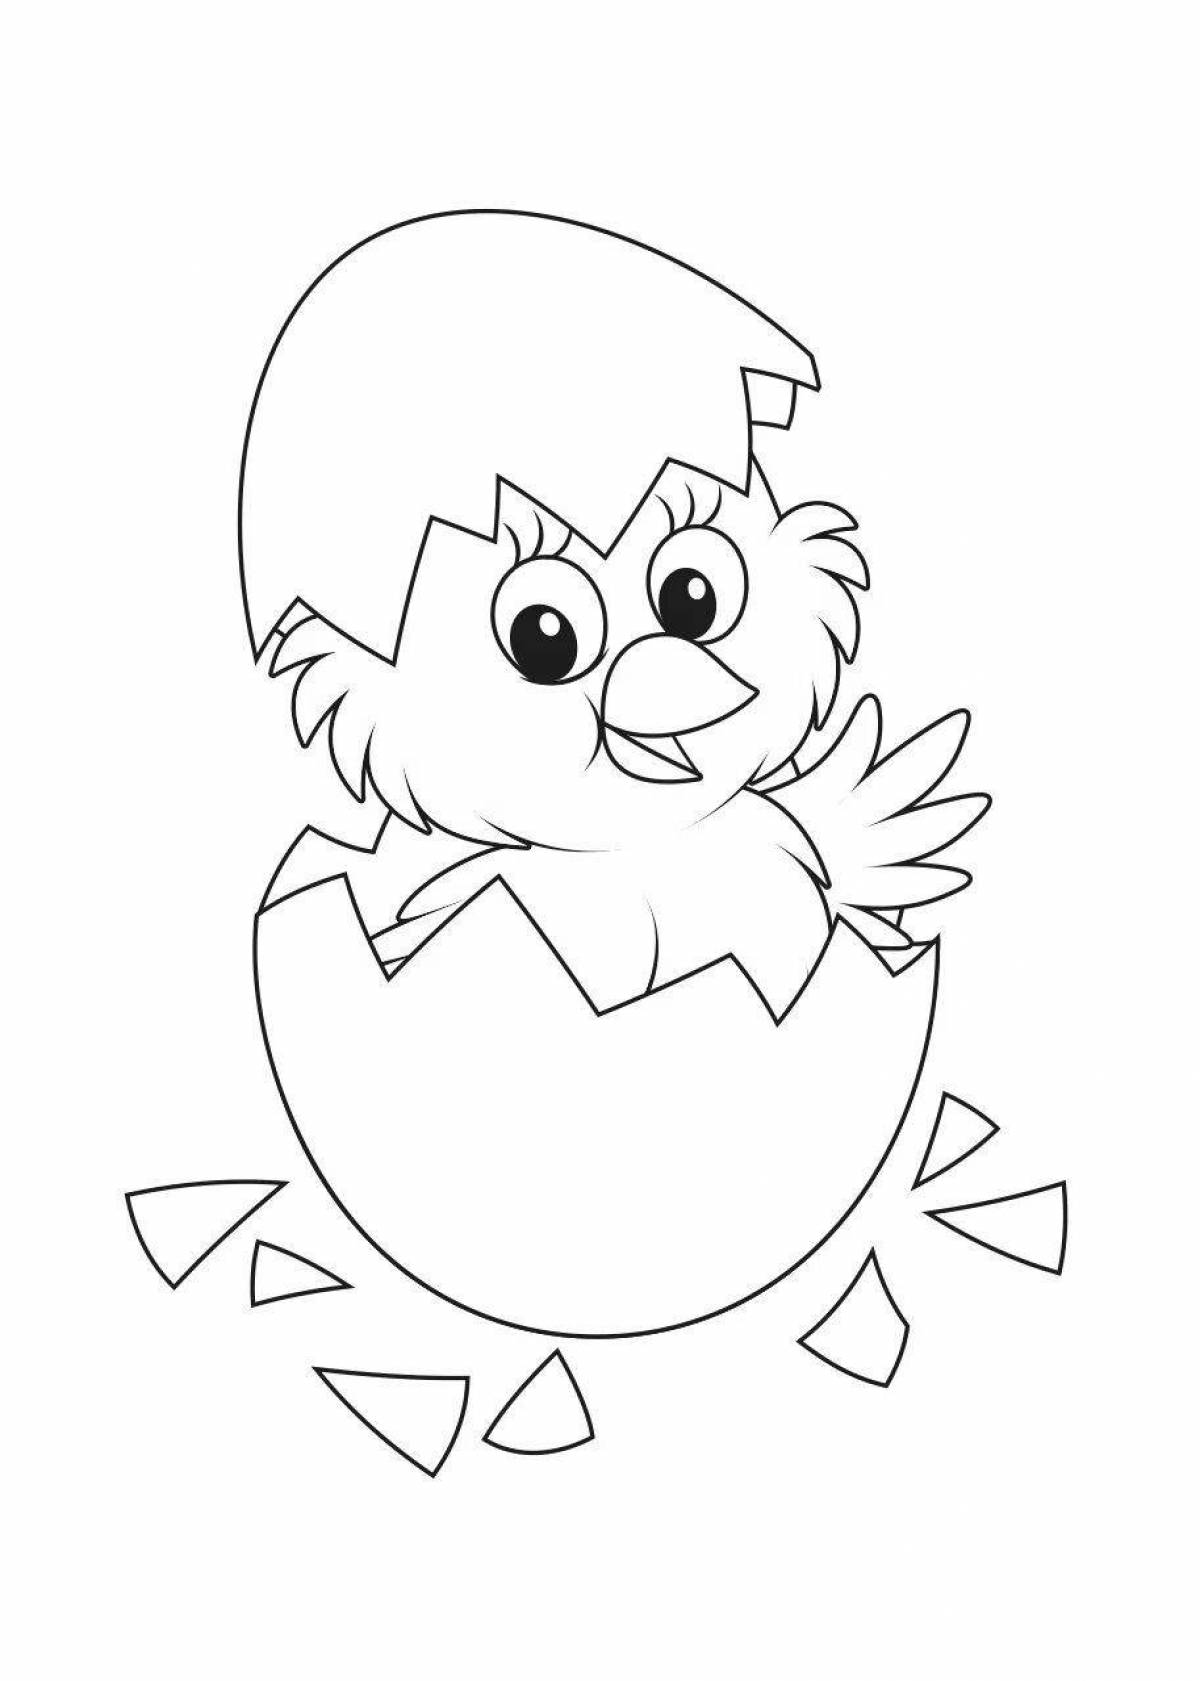 Cute chick in egg coloring book